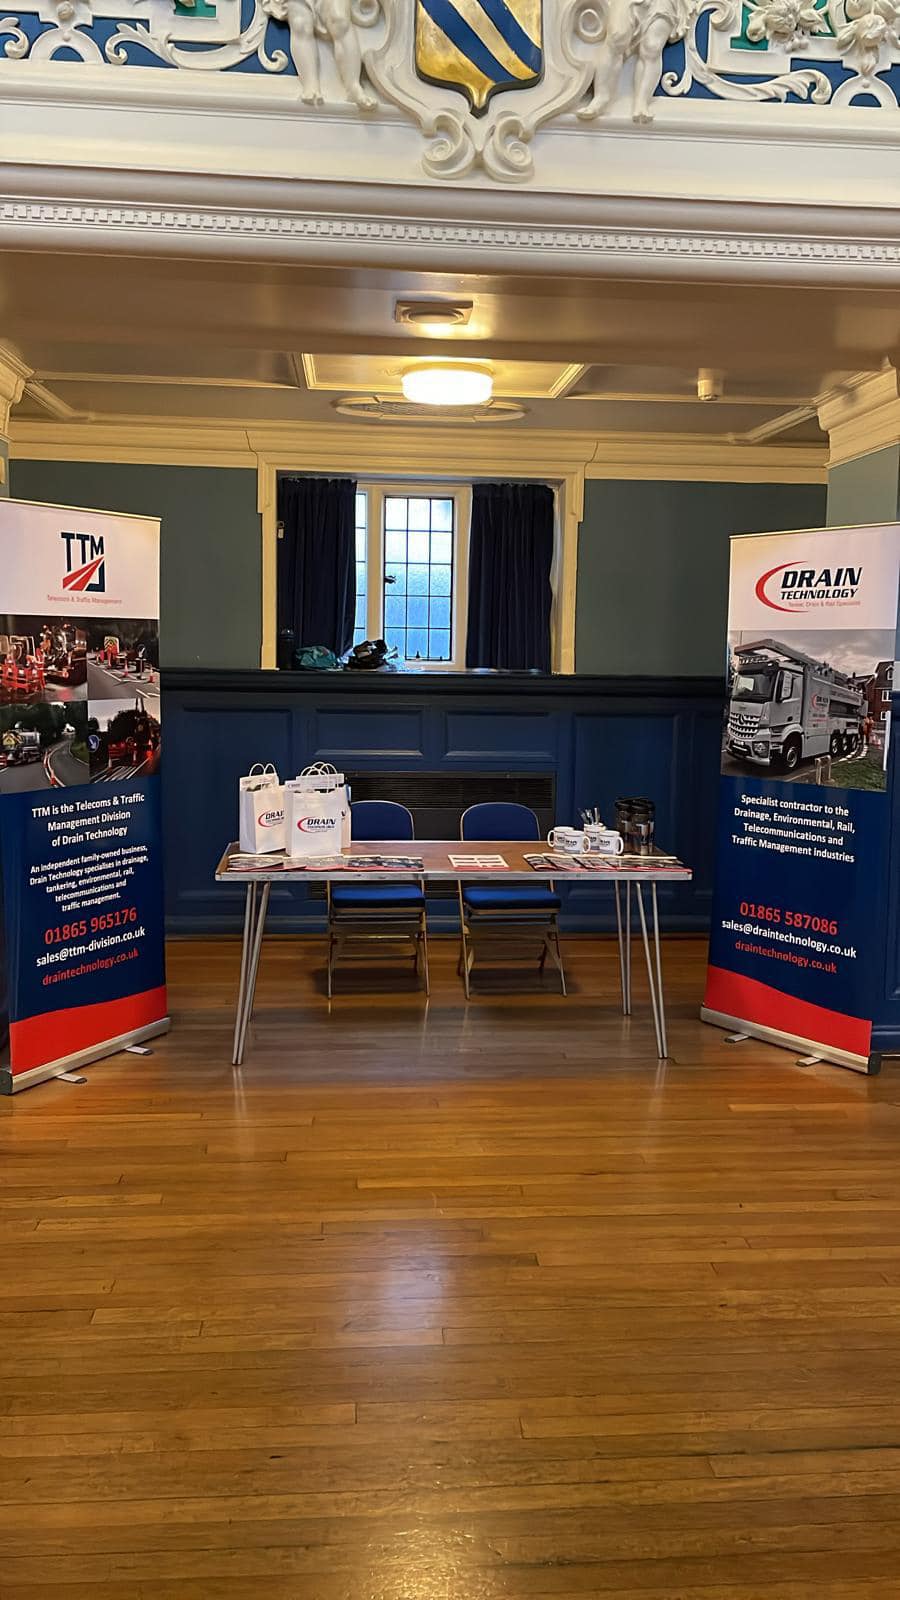 Today we have our business development manager Andy at a “meet the buyers” show where companies, local authorities and organisations can view the wide range of services we offer.